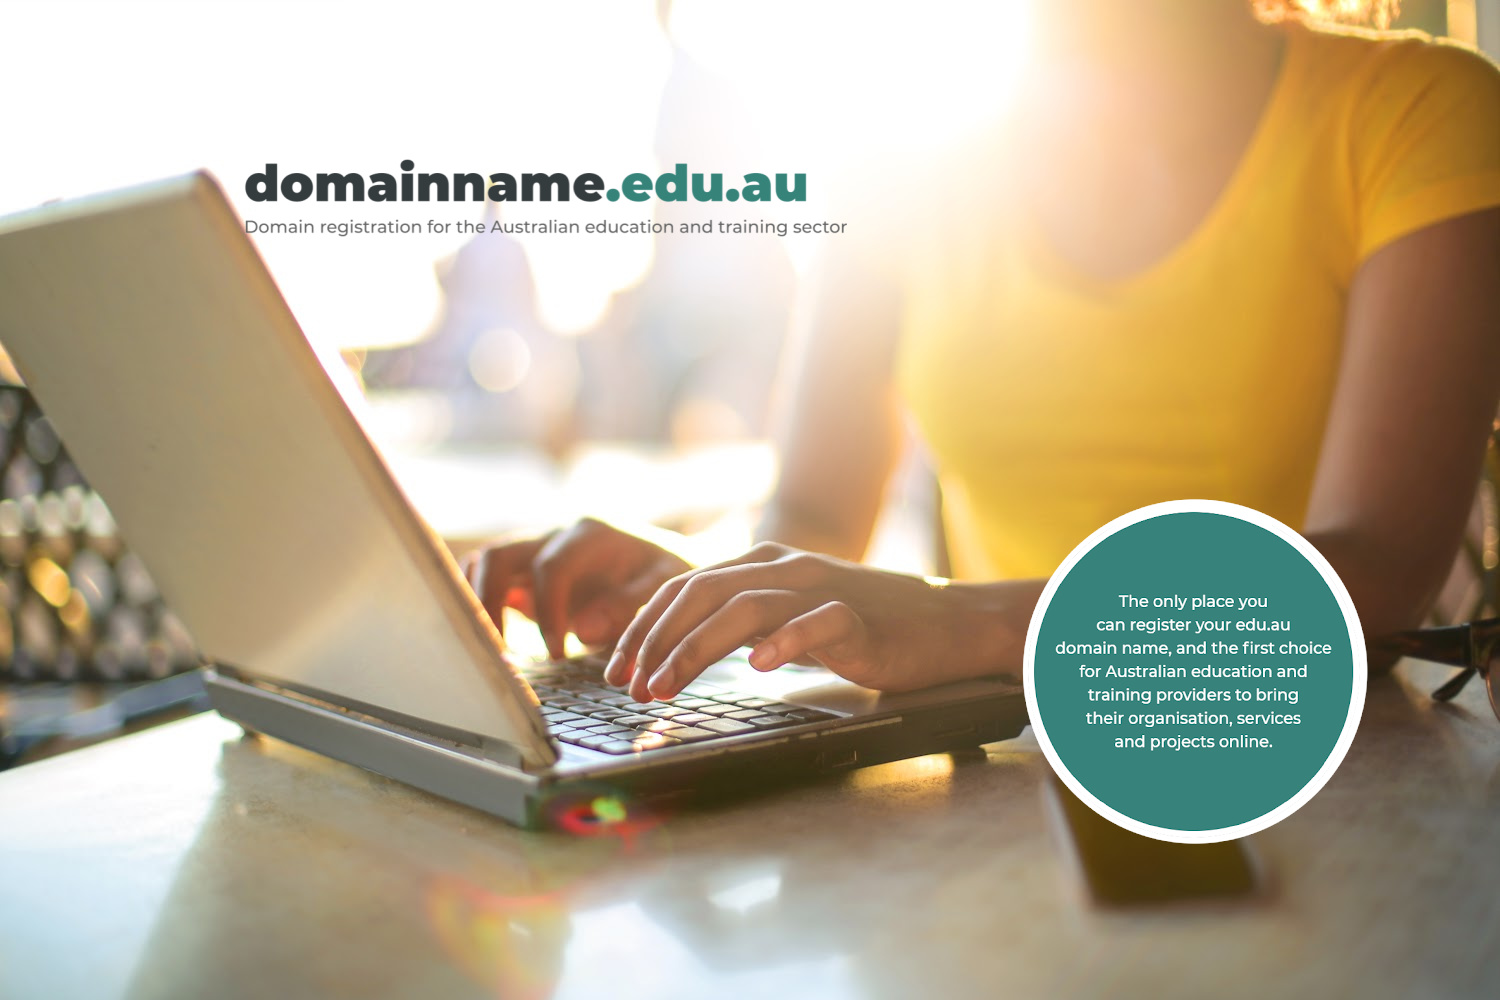 Show you are a recognised education provider with an edu.au domain